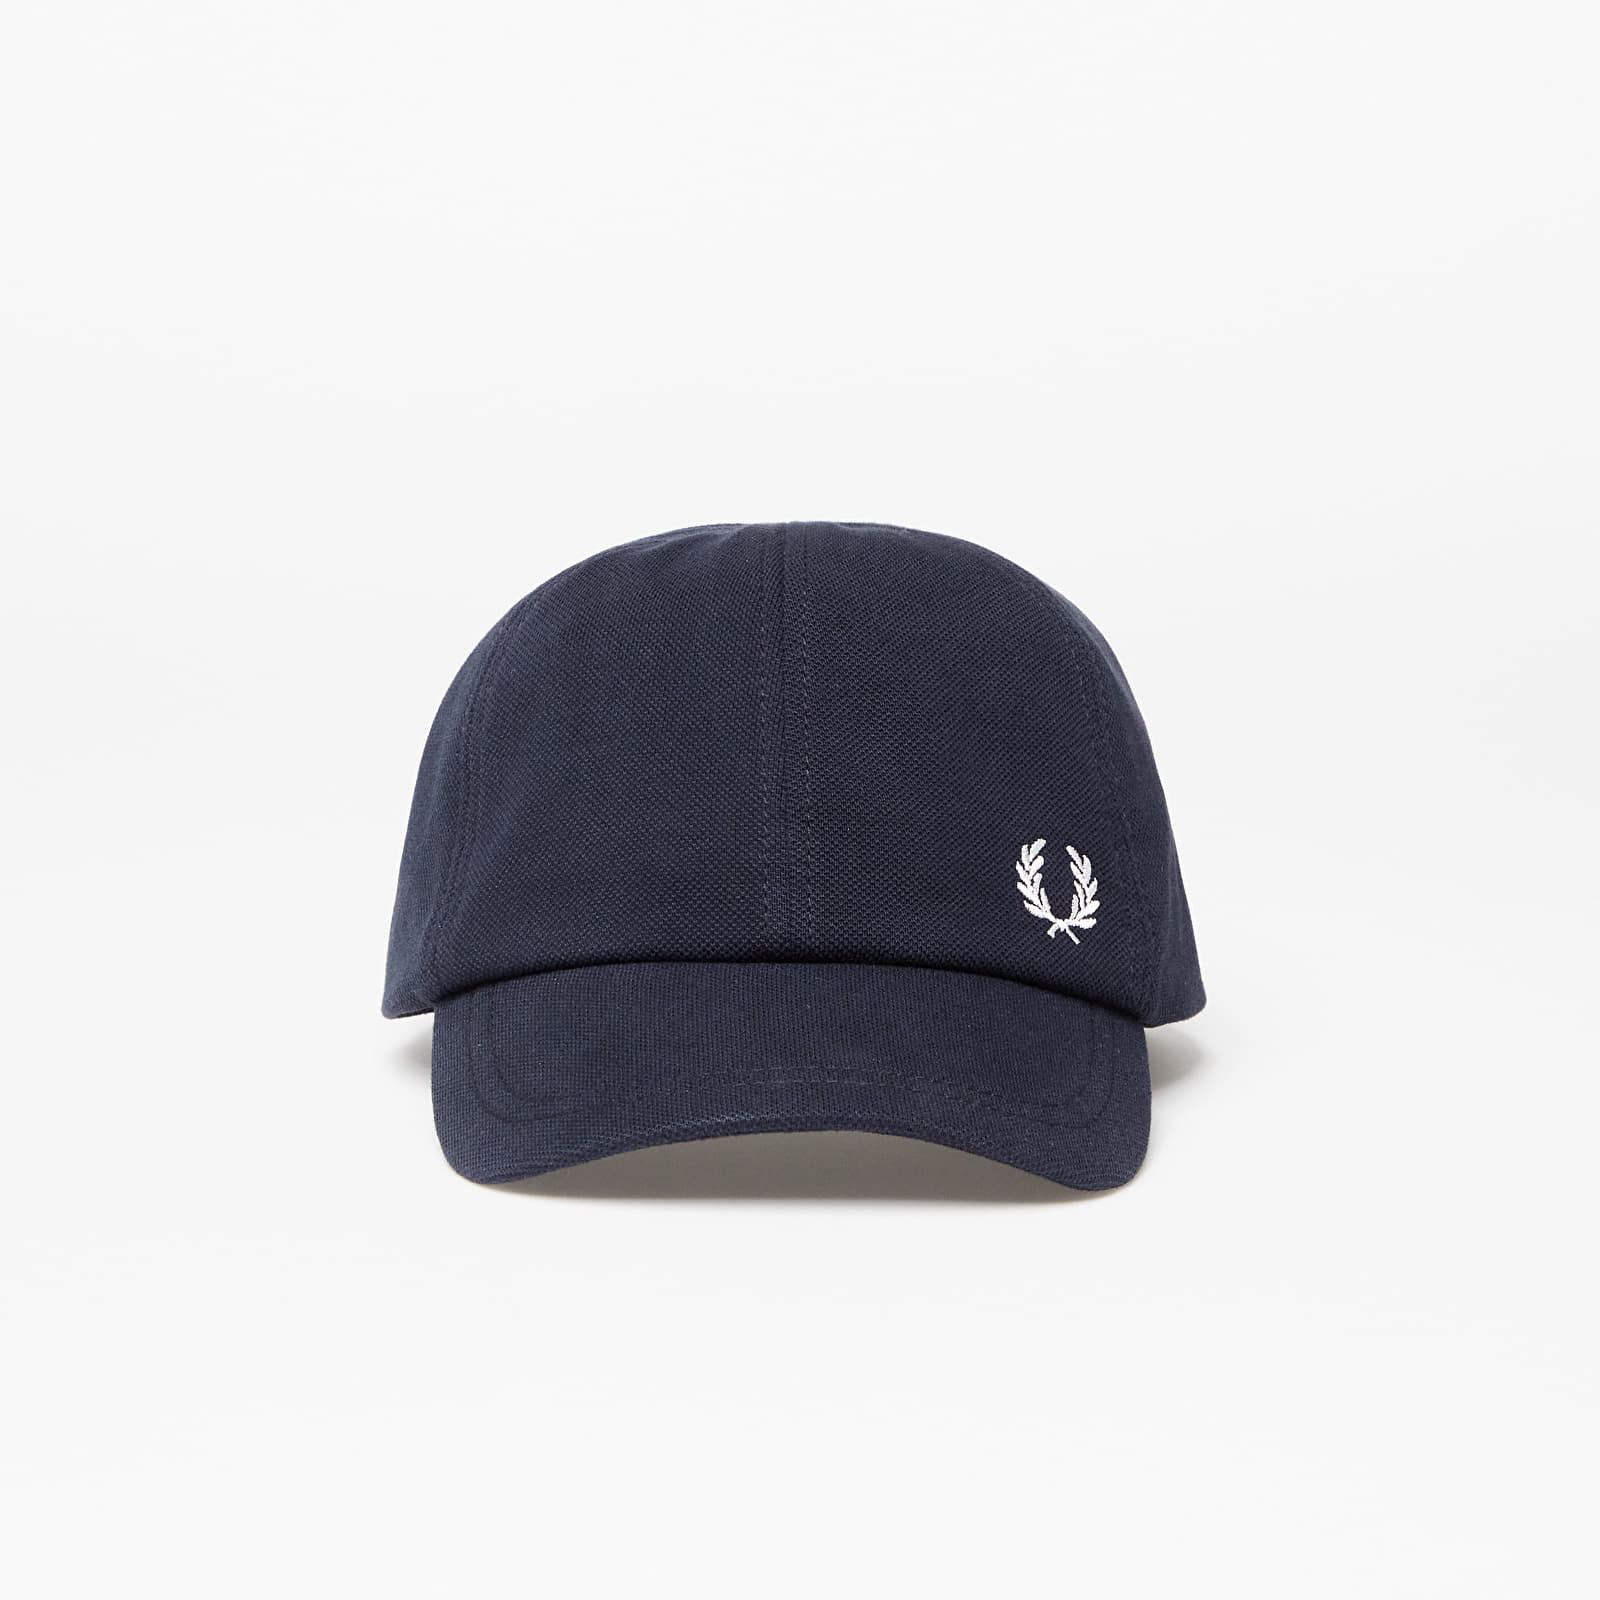 FRED PERRY - pique classic cap navy/ snow white